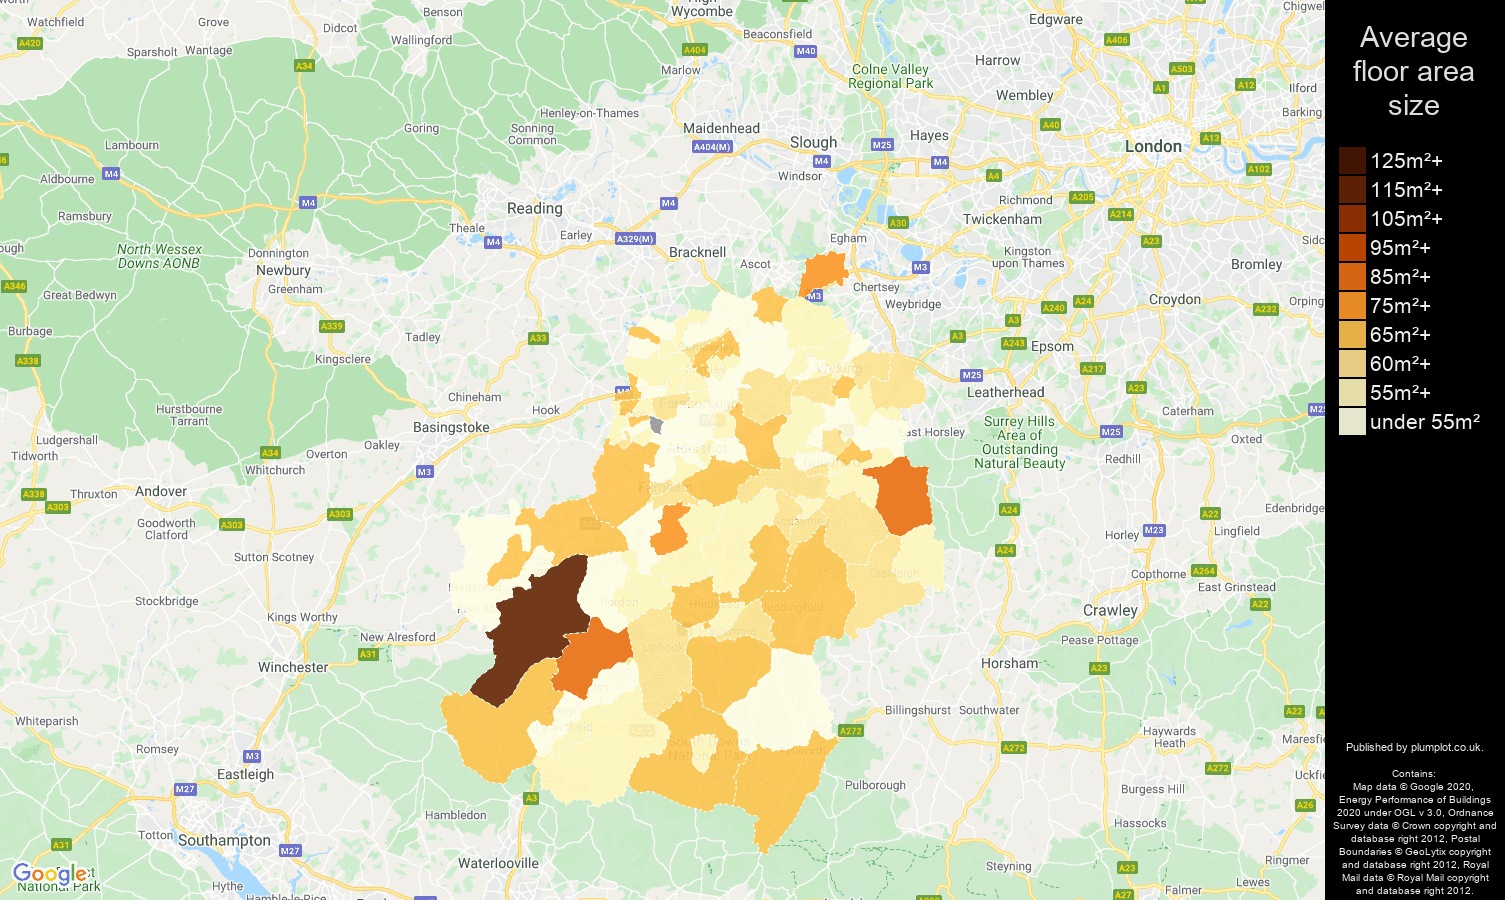 Guildford map of average floor area size of flats